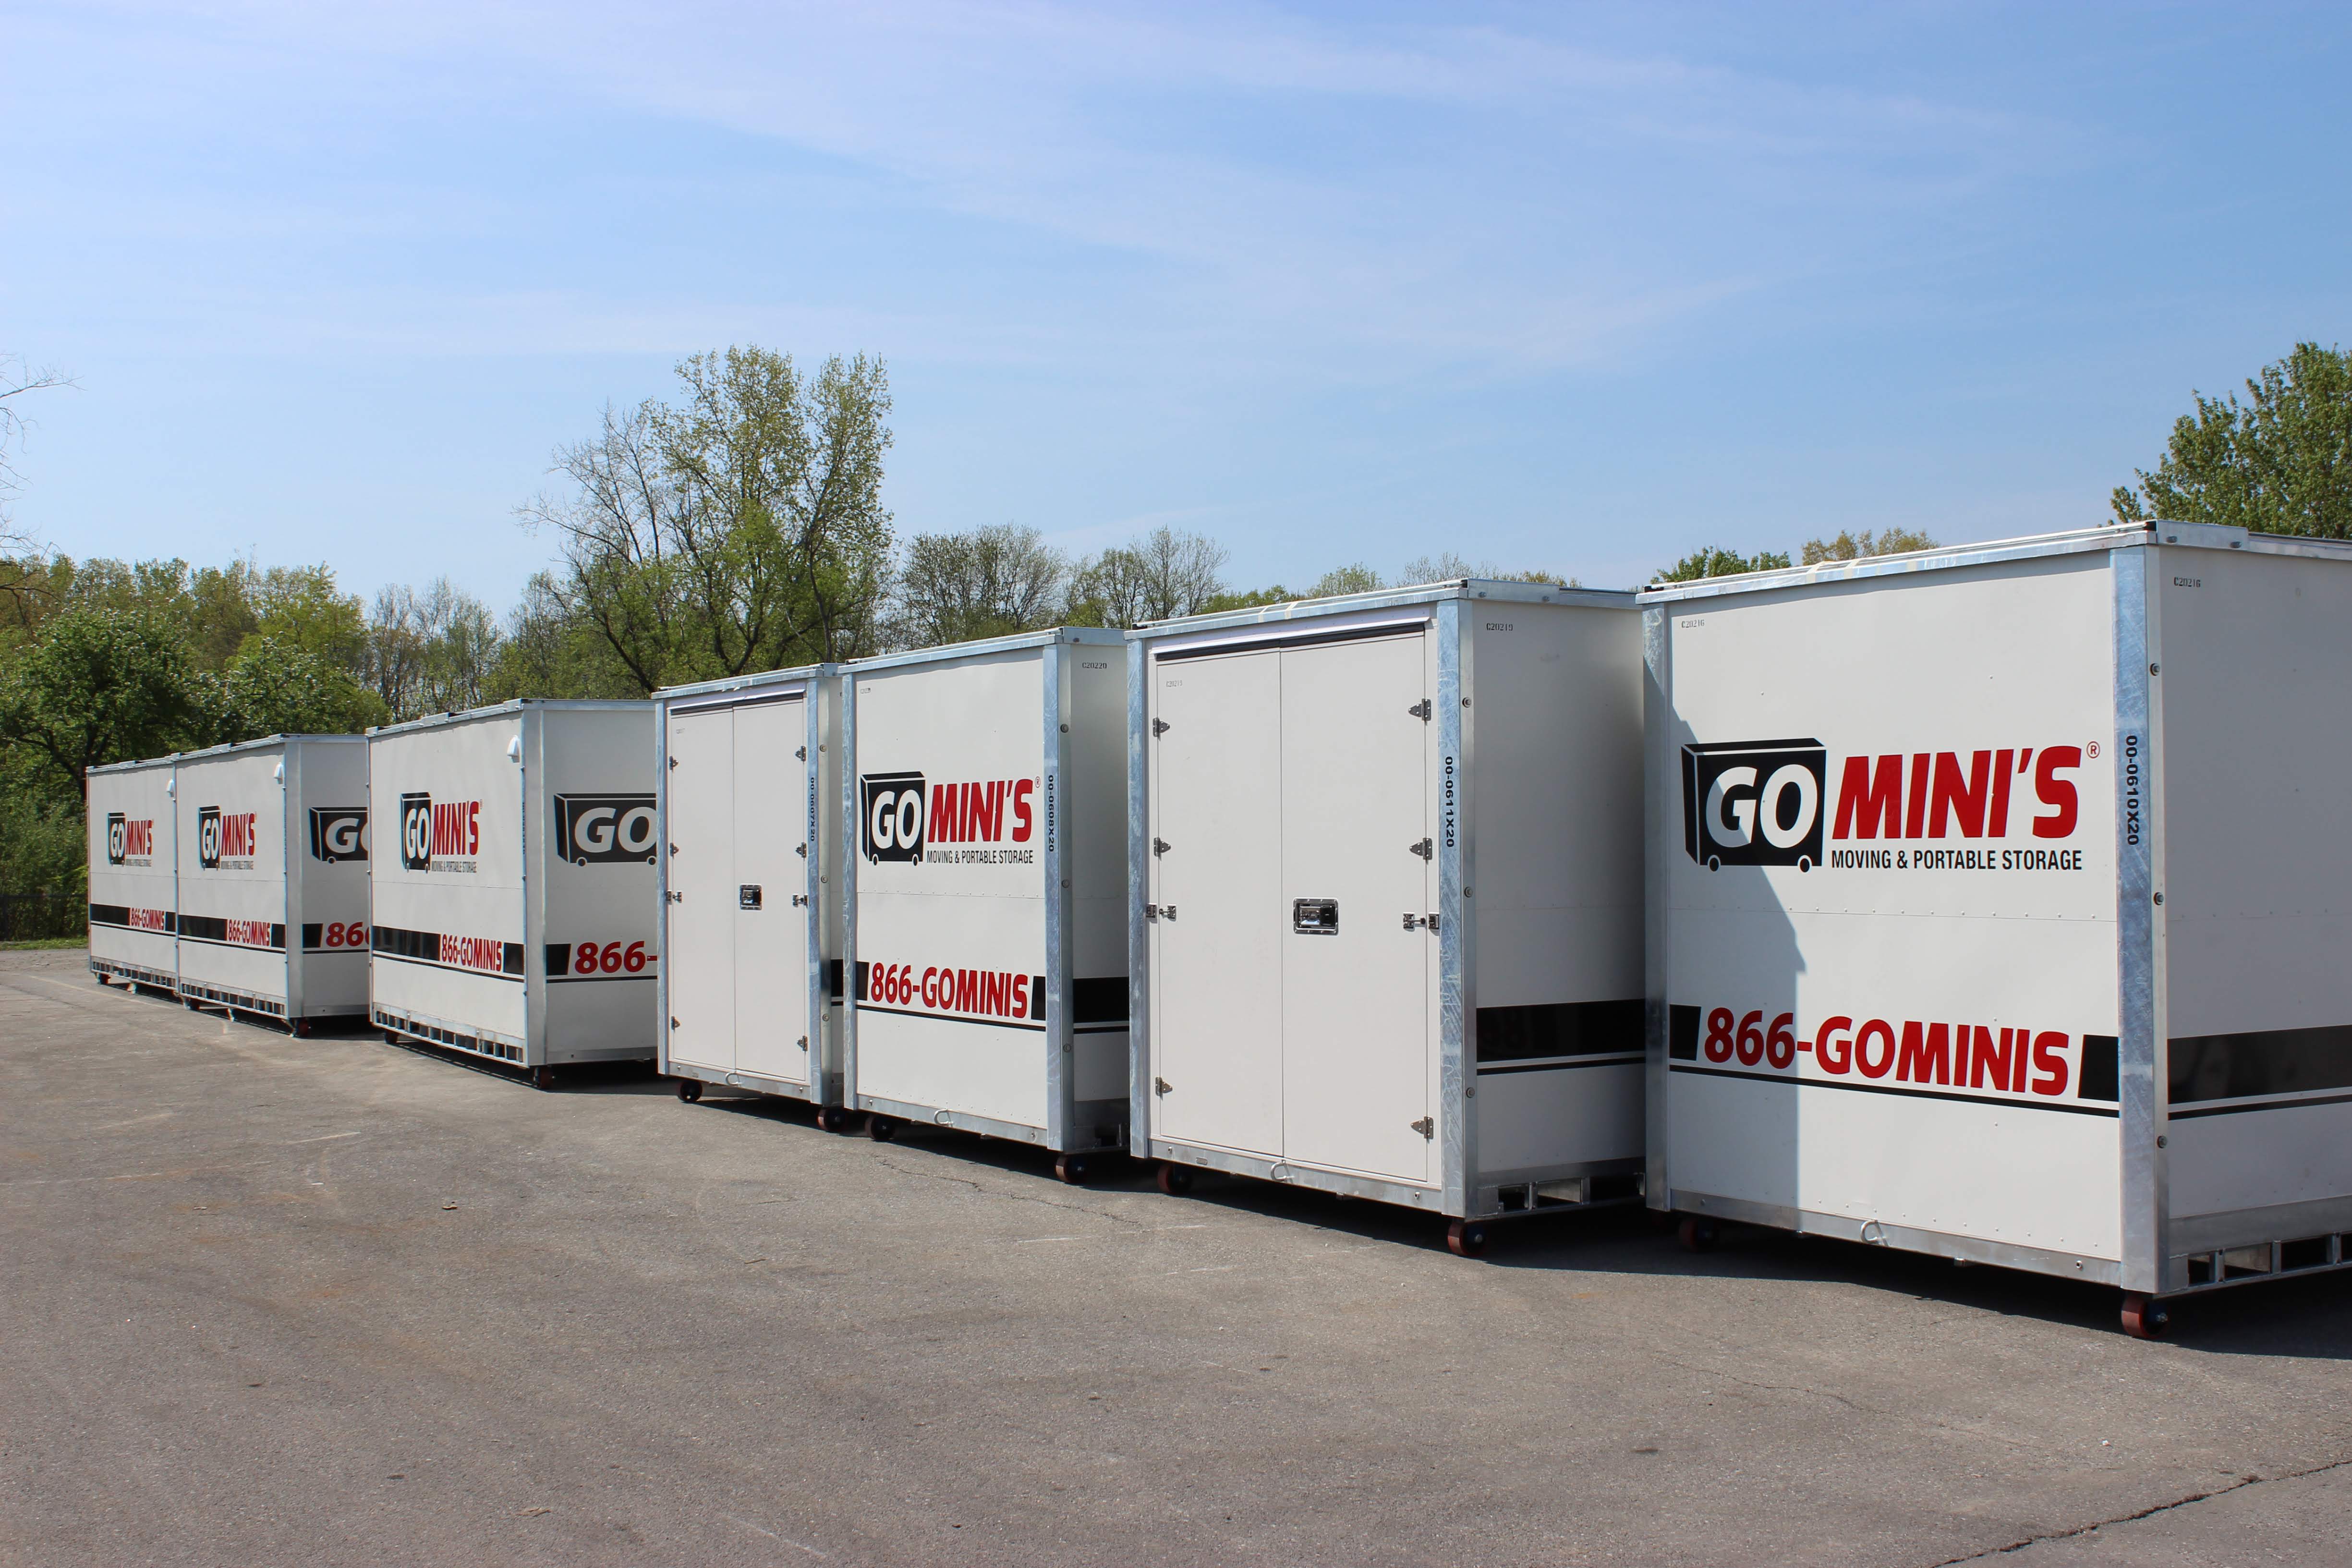 several mobile storage units from Go Mini's side-by-side 